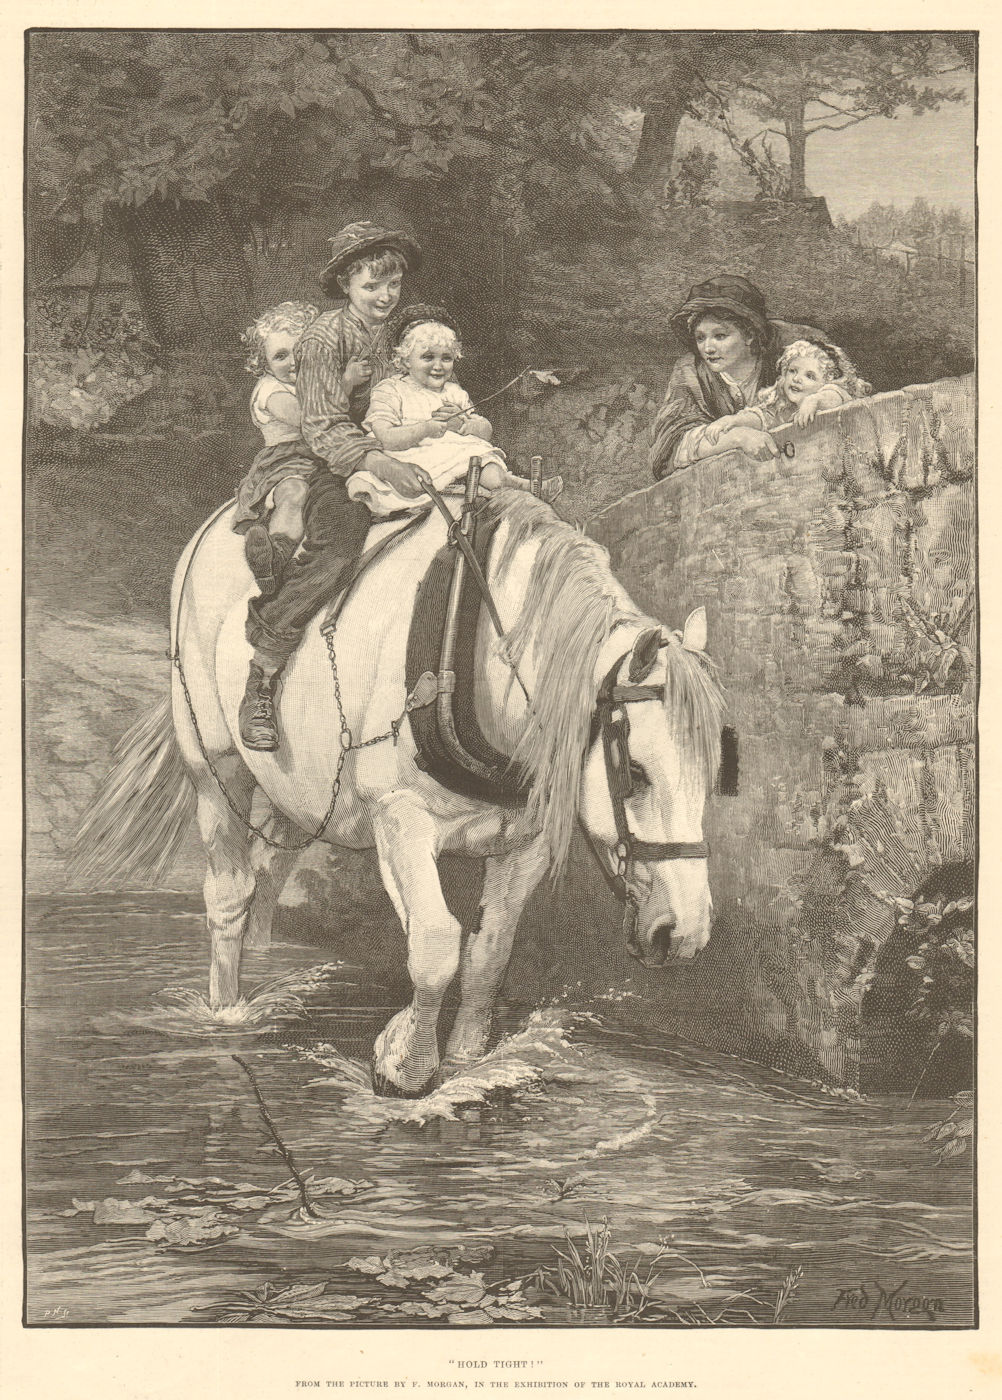 Associate Product "Hold tight", from the picture by F. Morgan. Children. Horses 1891 print